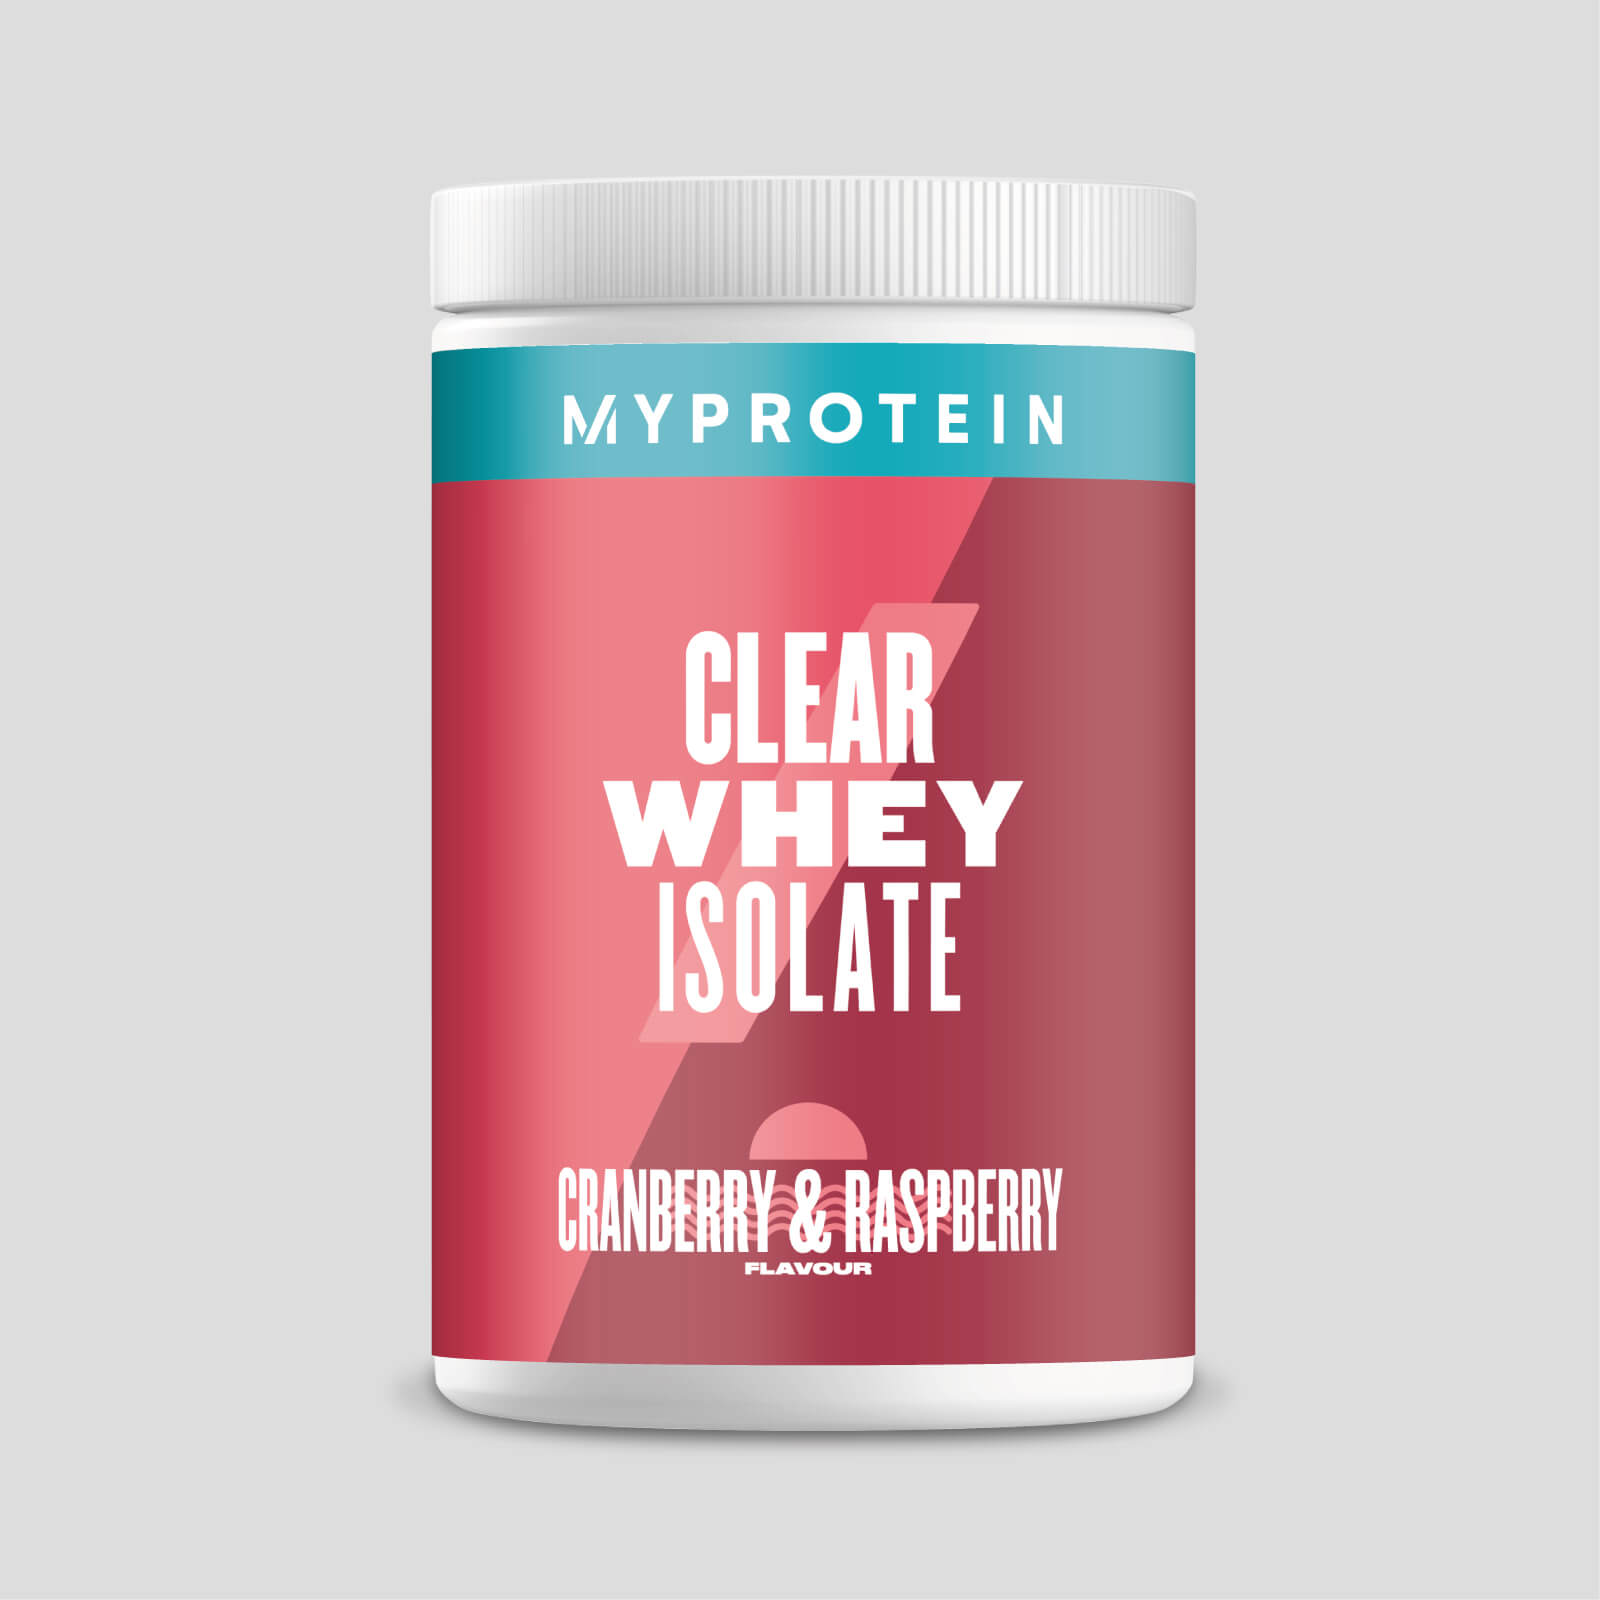 Myprotein Clear Whey Isolate - 35servings - Cranberry & Raspberry